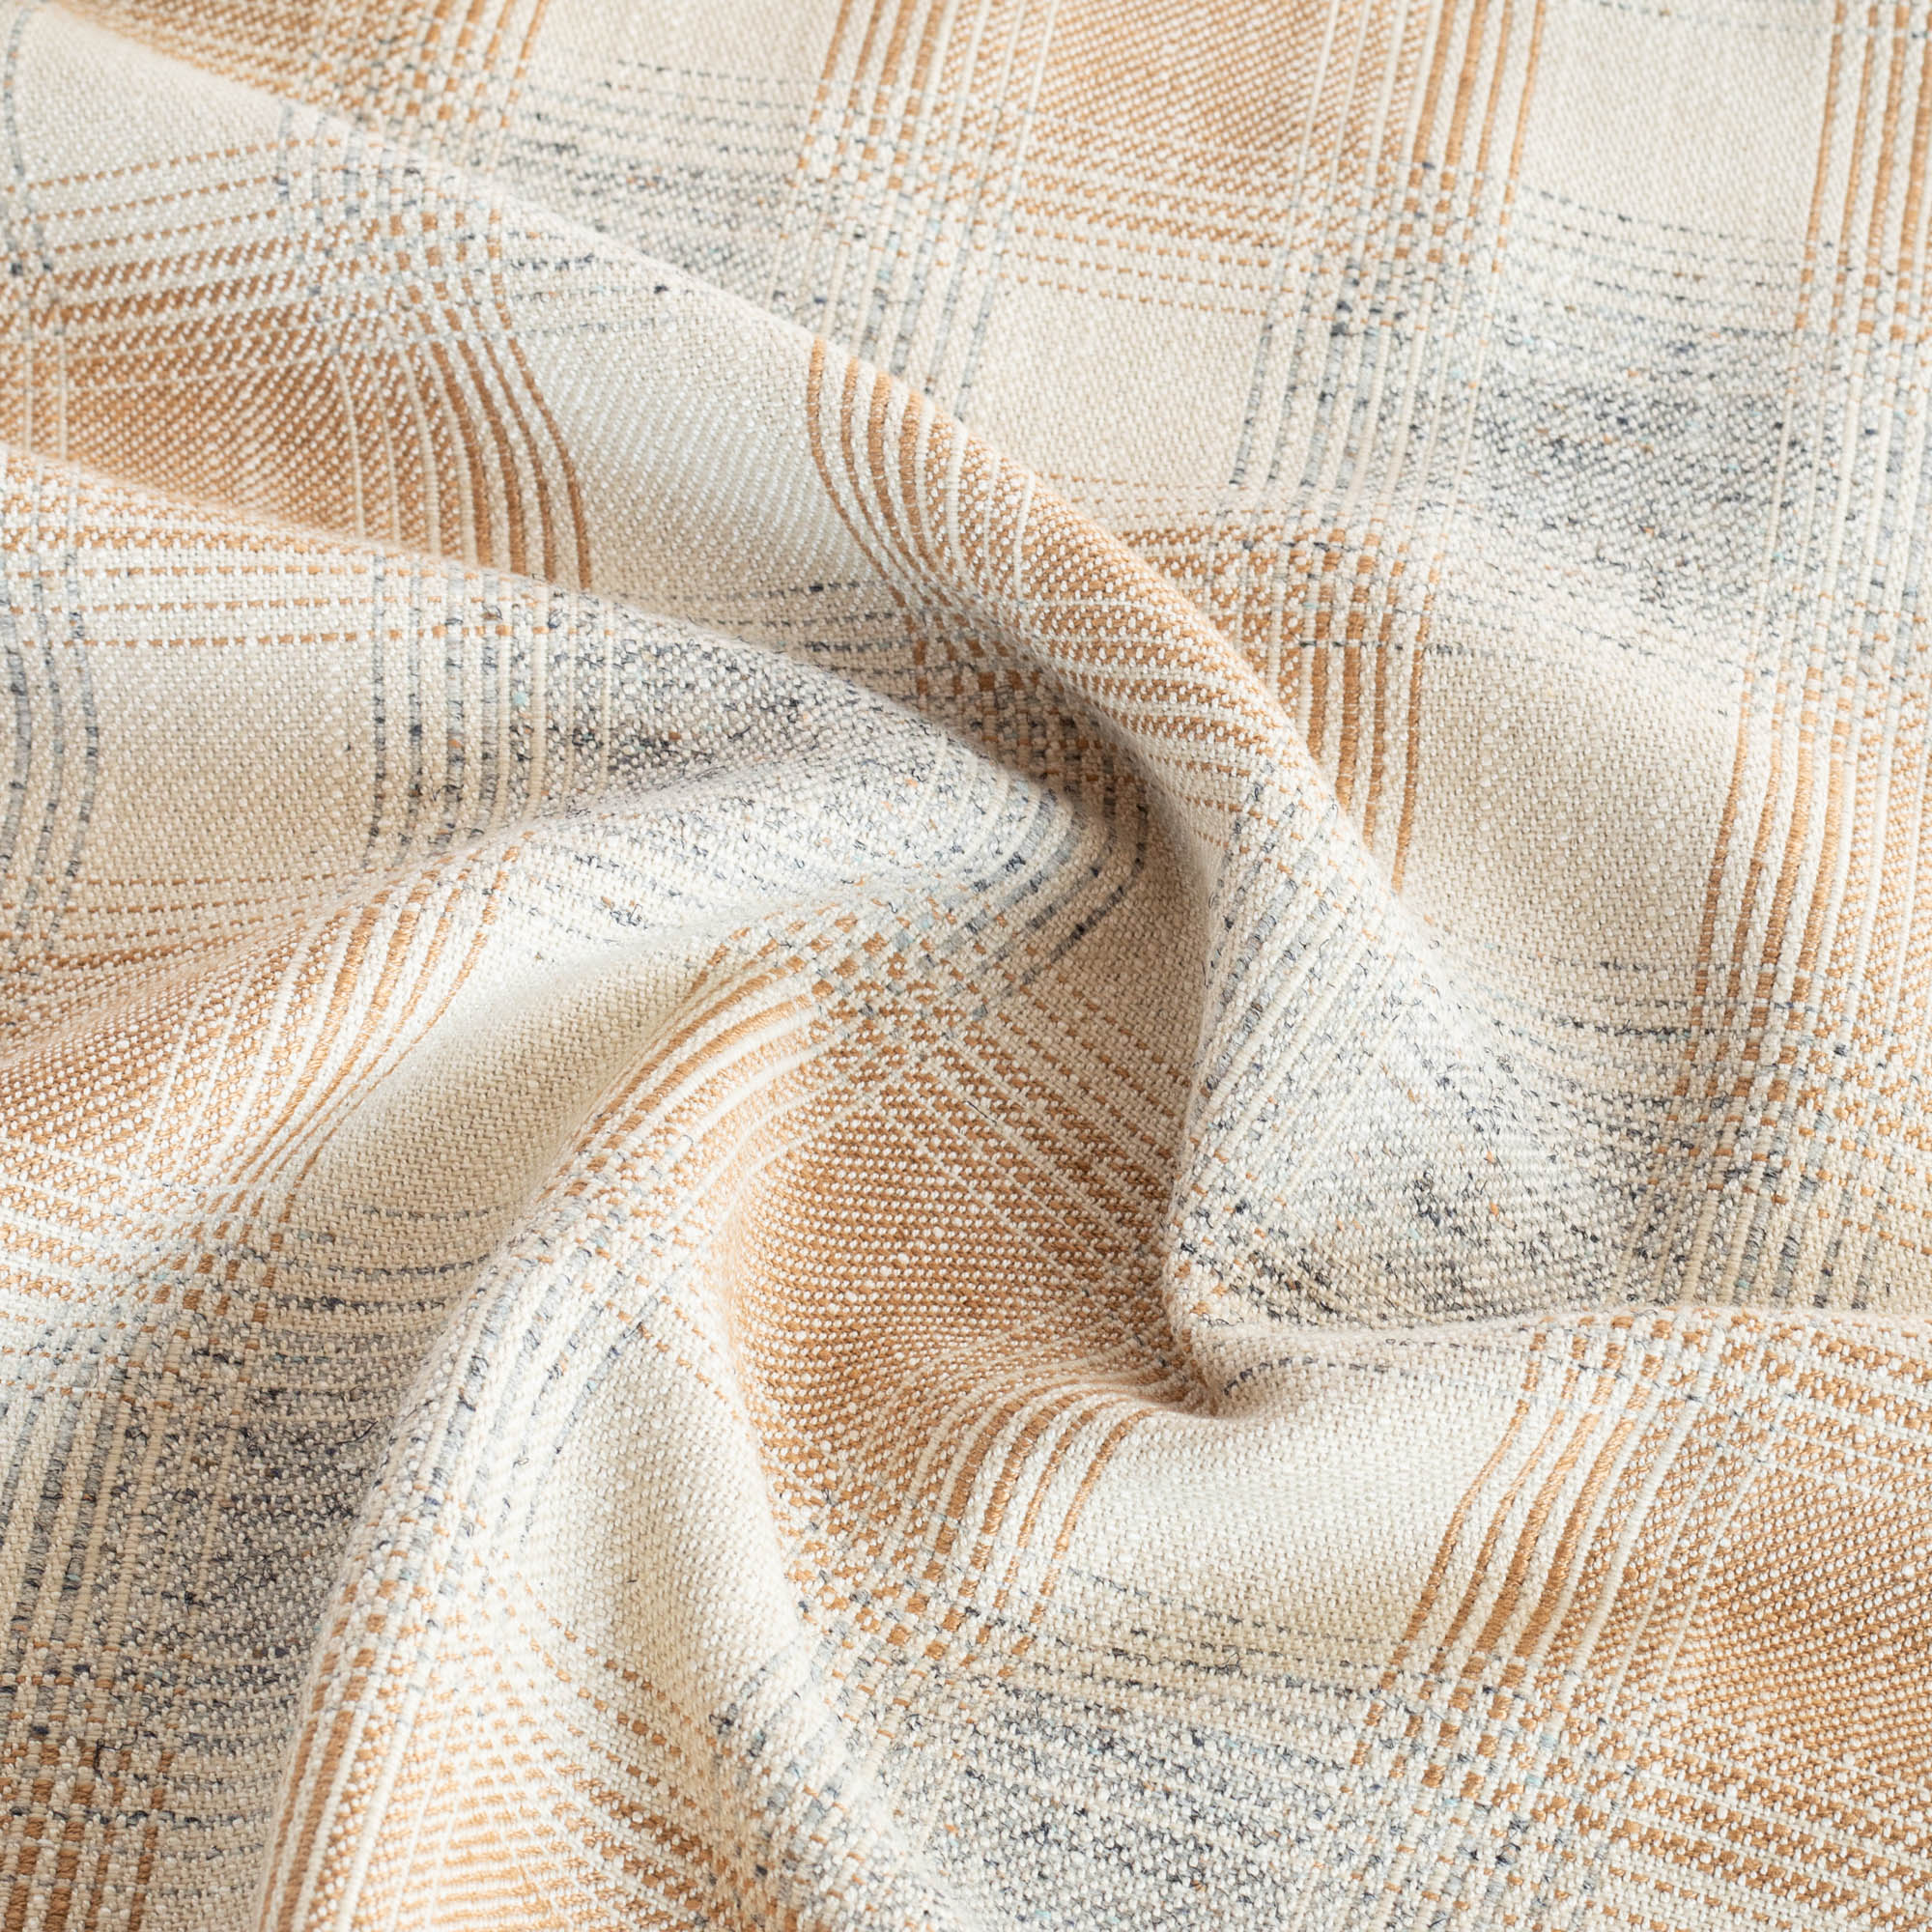 Natural Linen Fabric  Cloth House • Cloth House